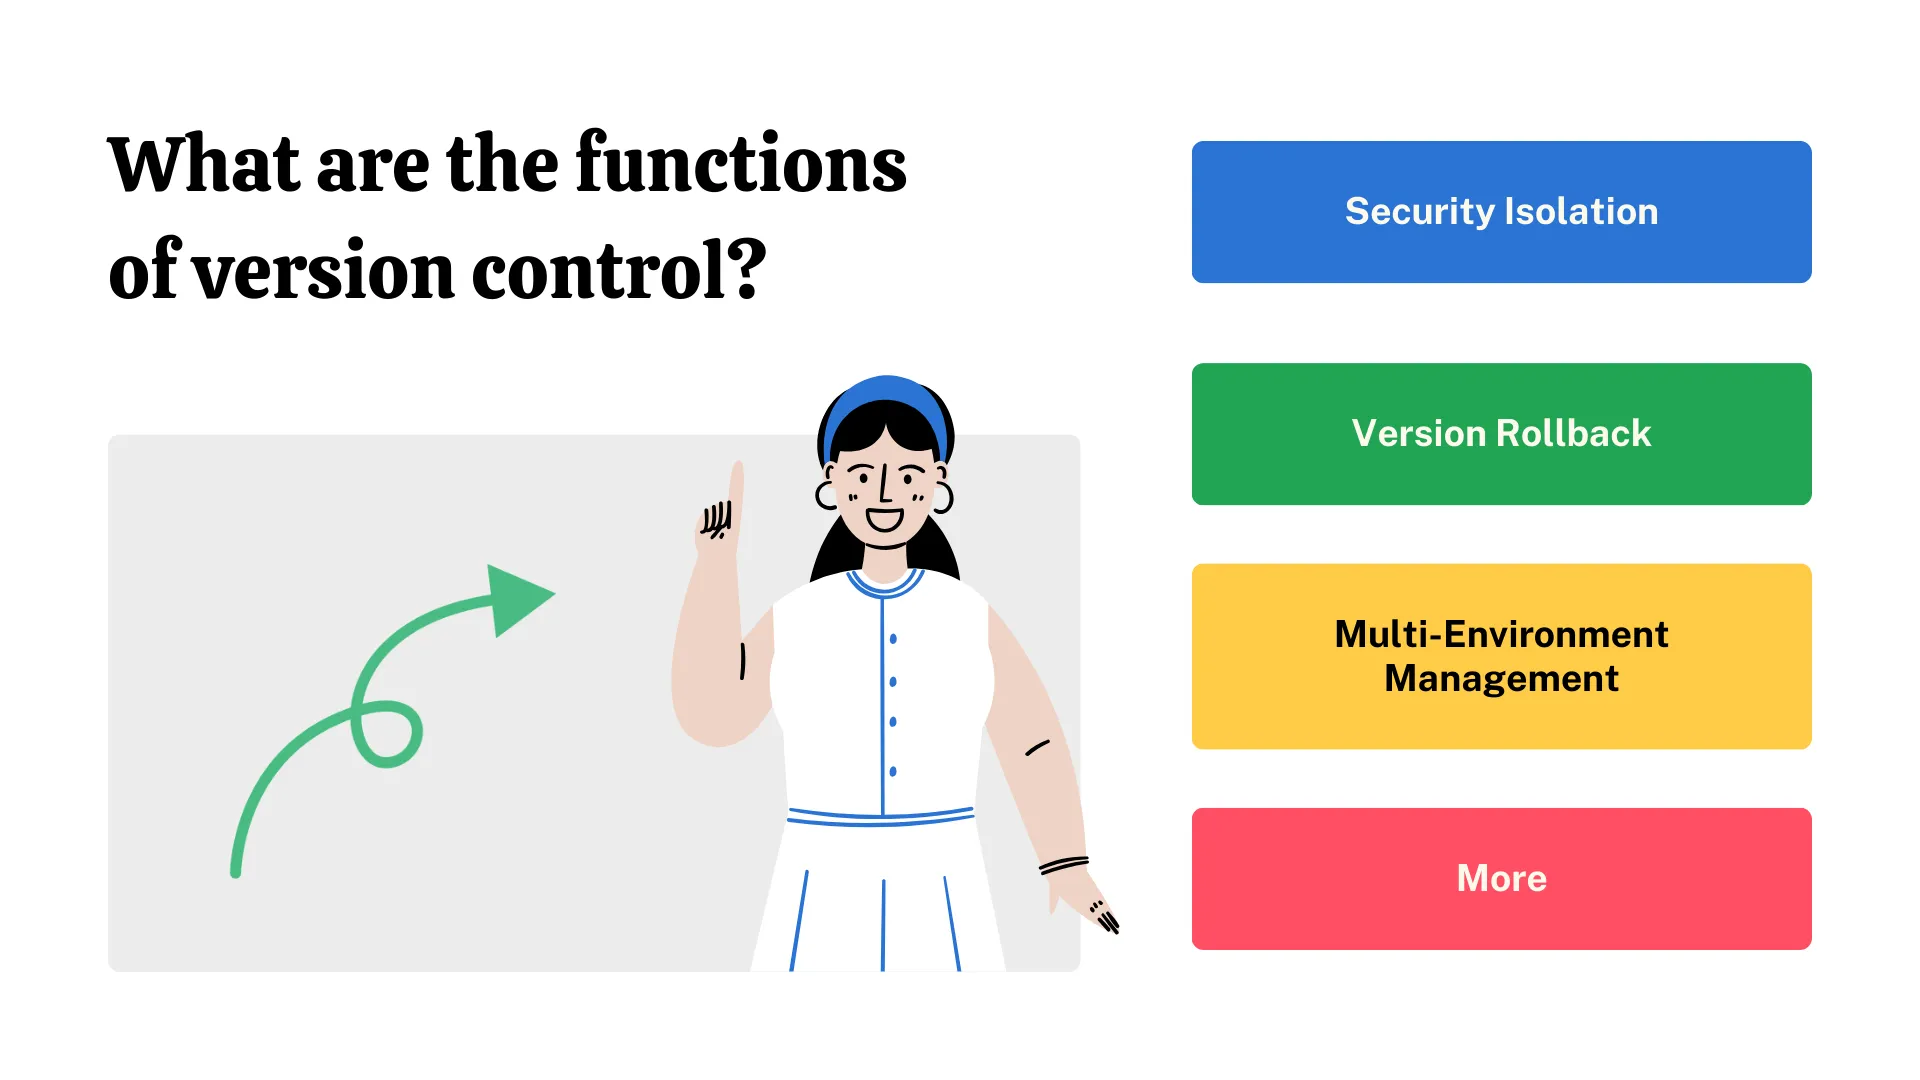 Functions of version control